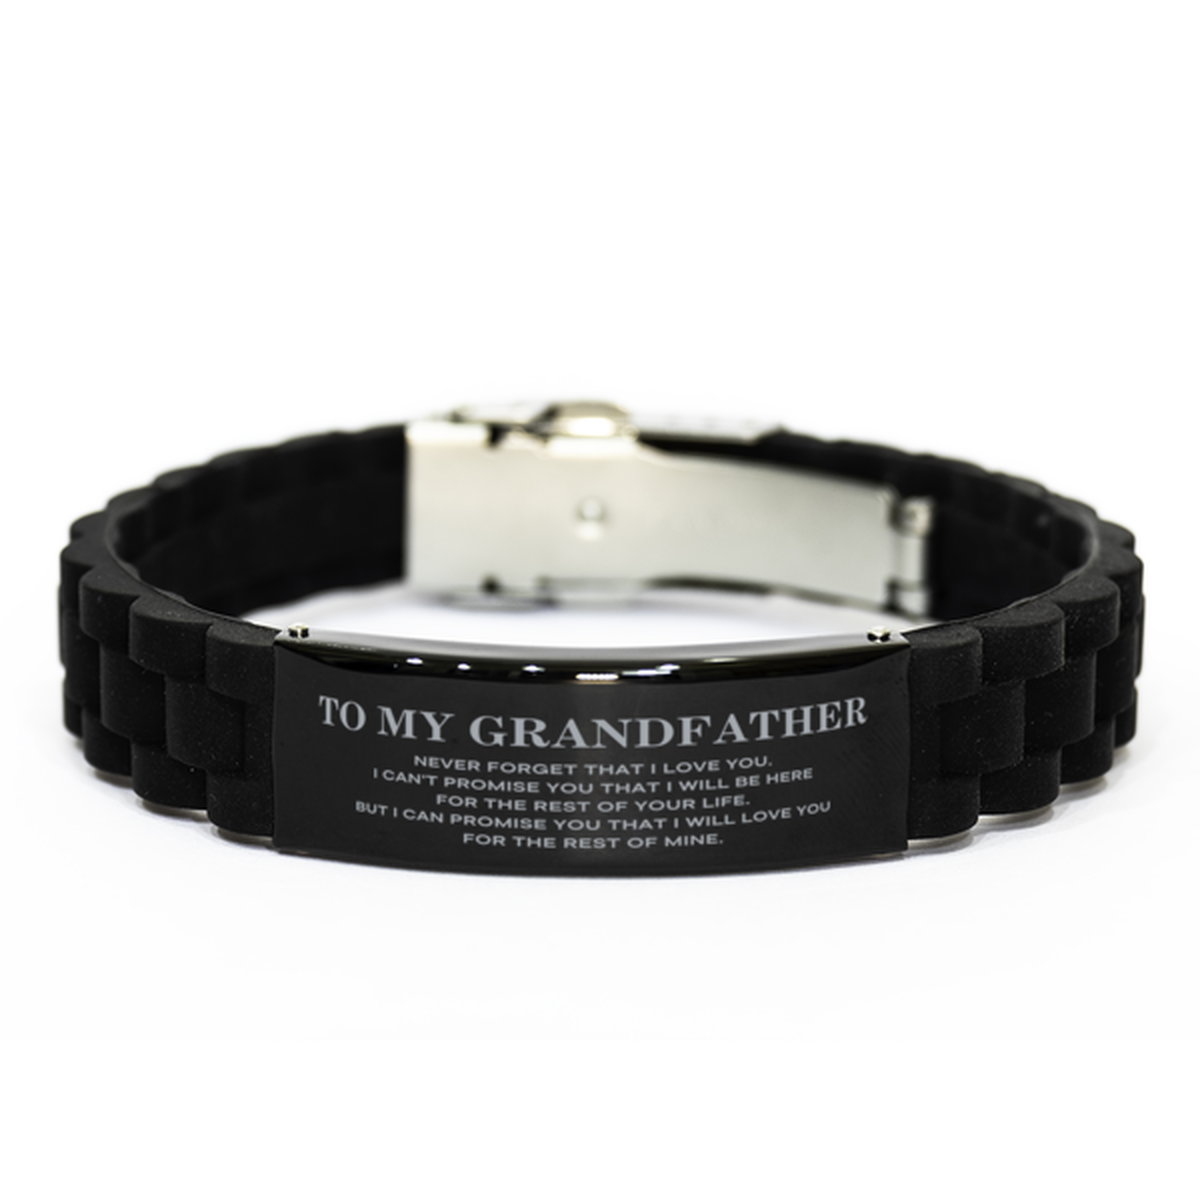 To My Grandfather Gifts, I will love you for the rest of mine, Love Grandfather Bracelet, Birthday Christmas Unique Black Glidelock Clasp Bracelet For Grandfather